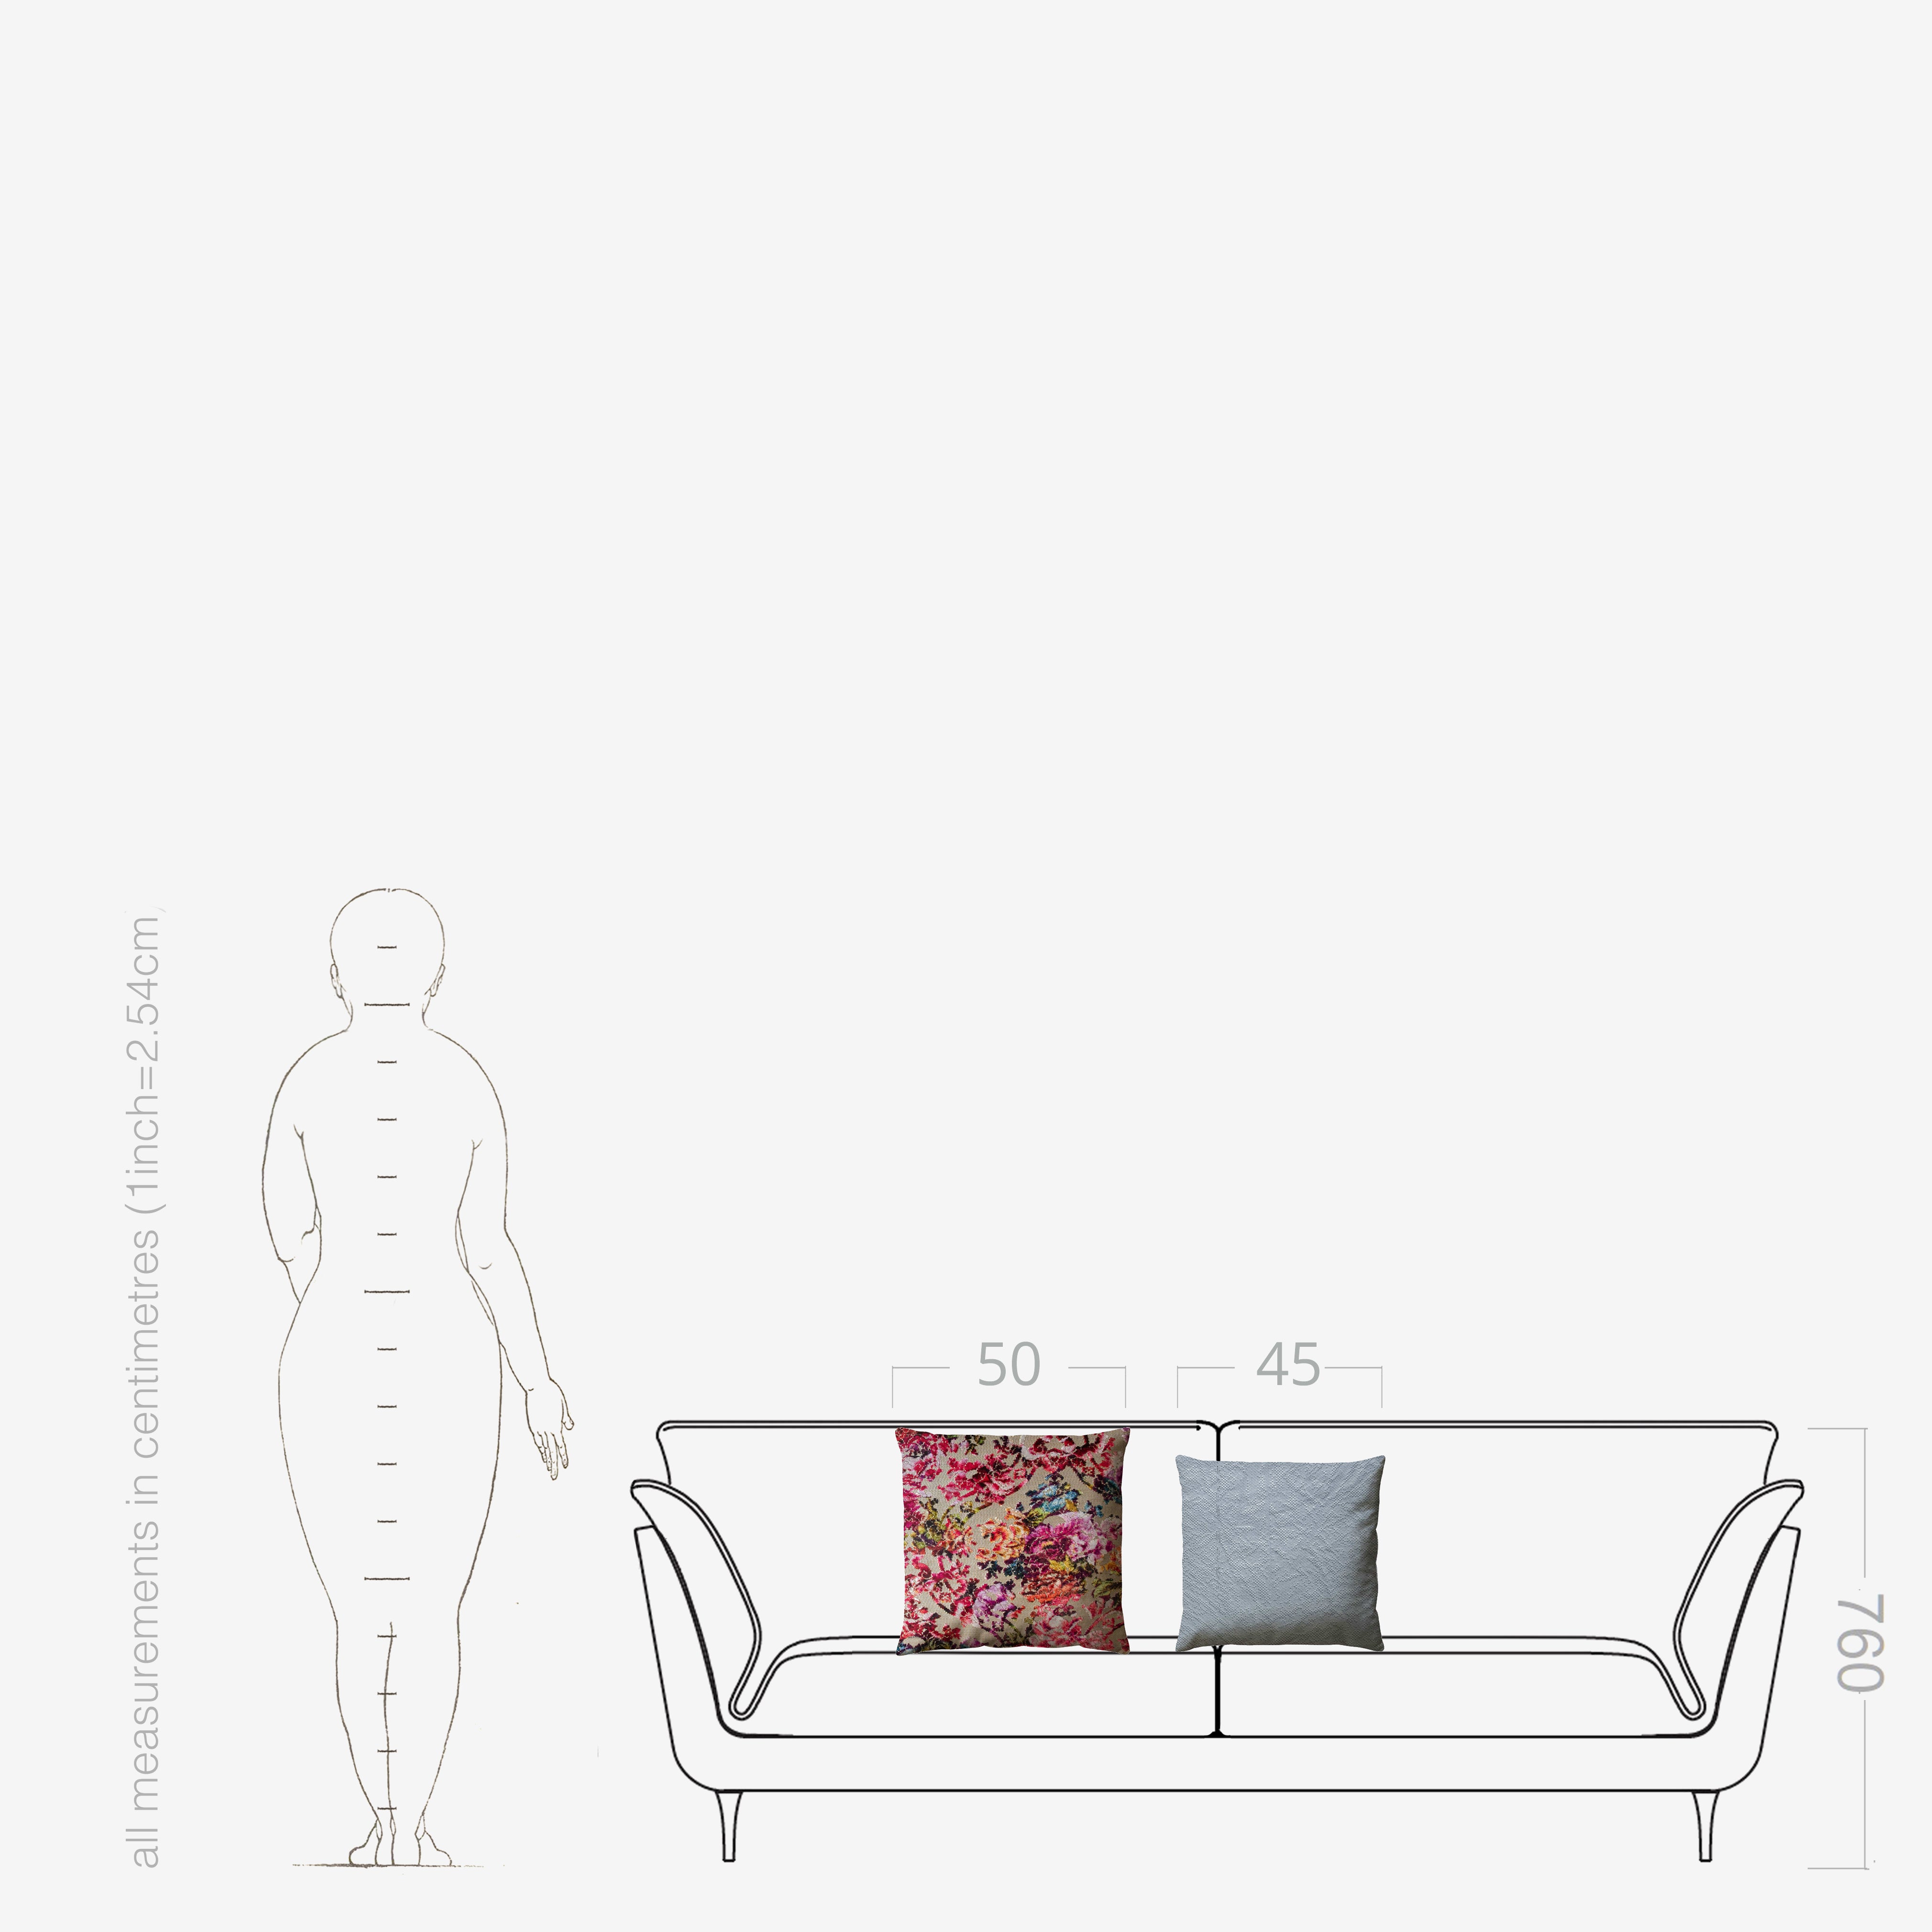 dimensions of cushions